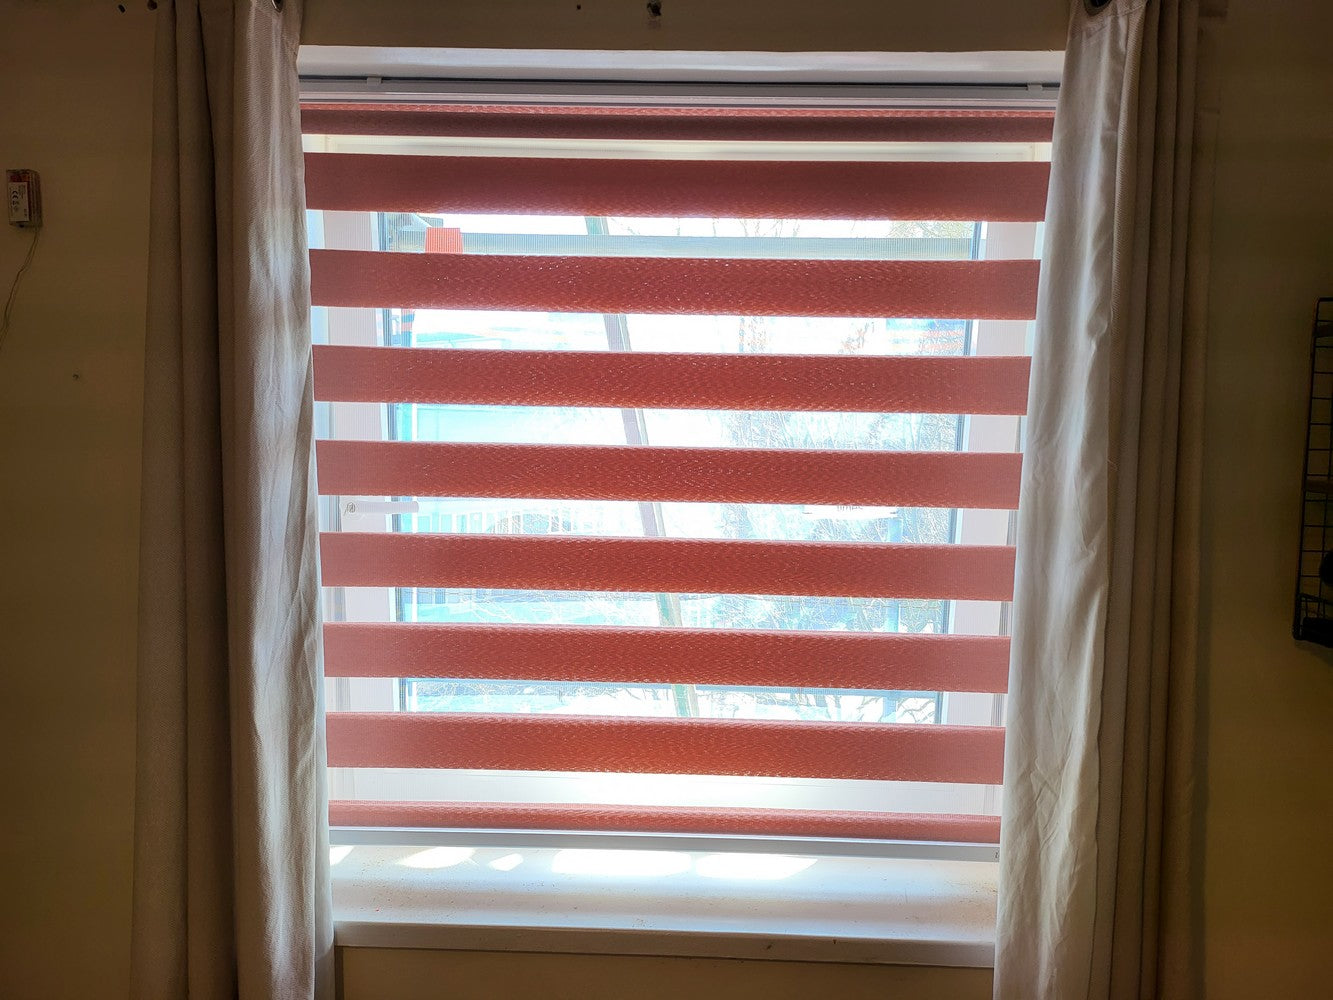 Decor Blinds Privacy 114 Powder Pink